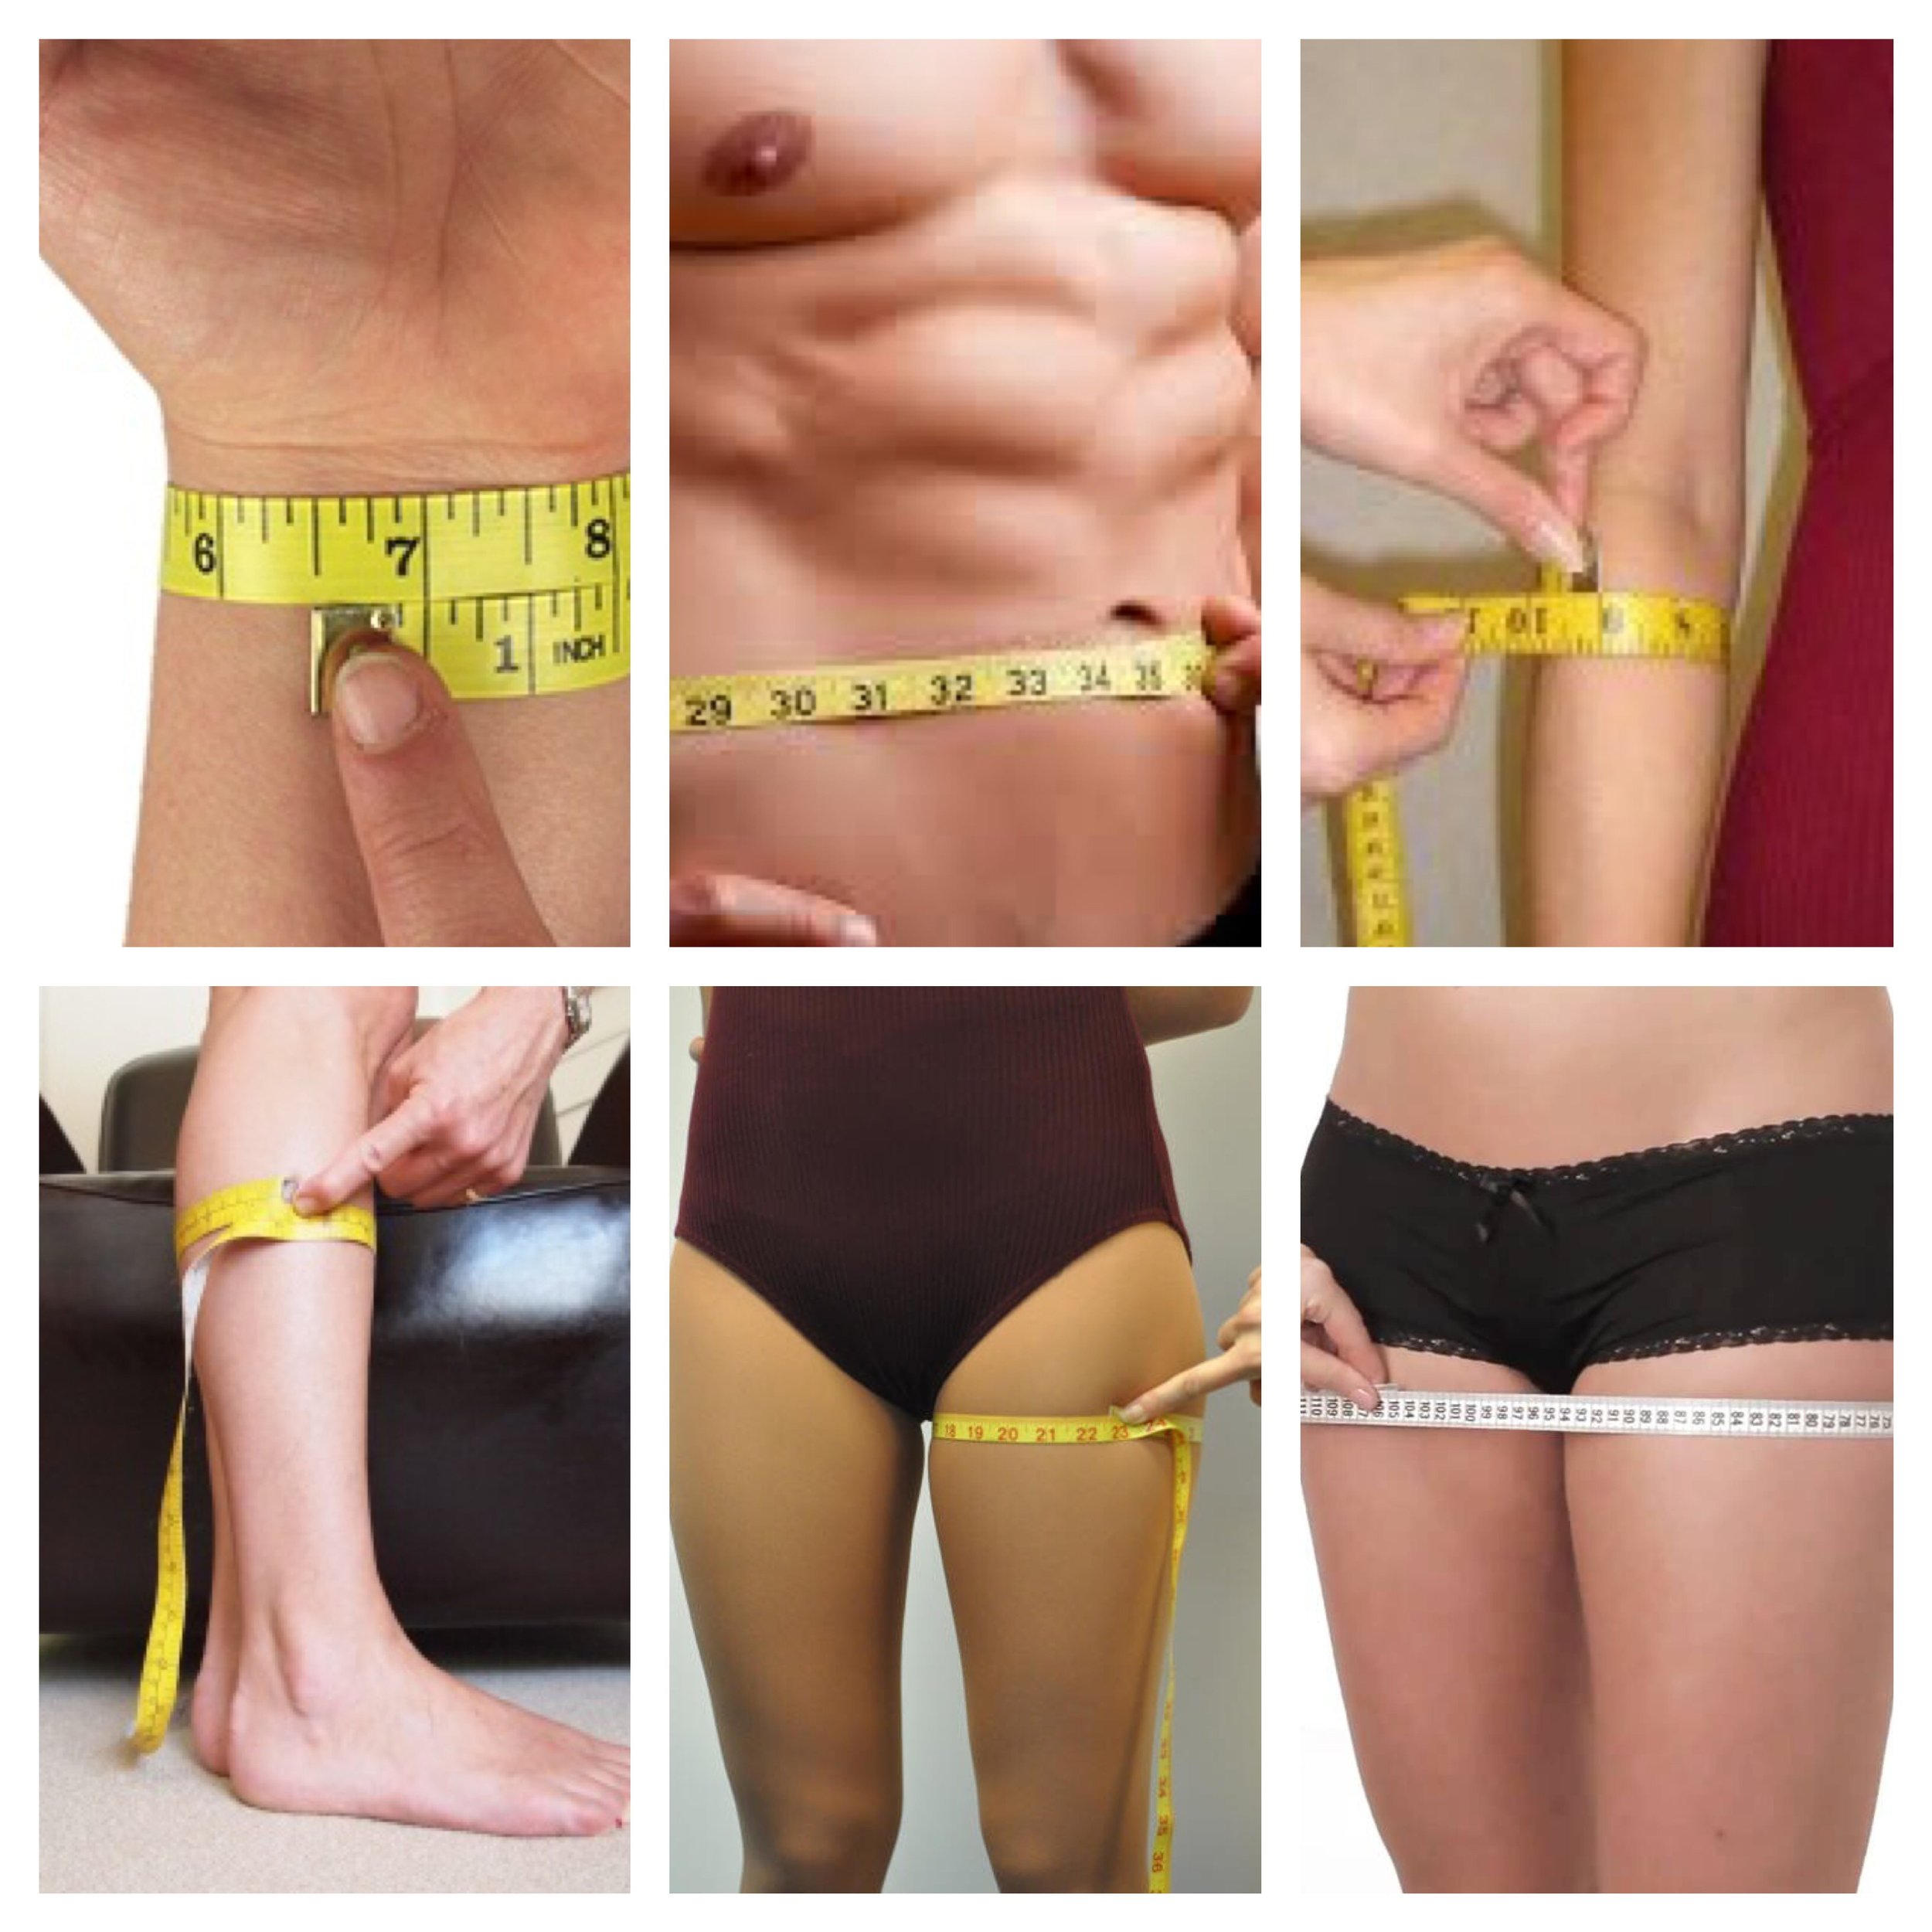 How to Measure Body Fat the Simplest and Most Accurate Way?